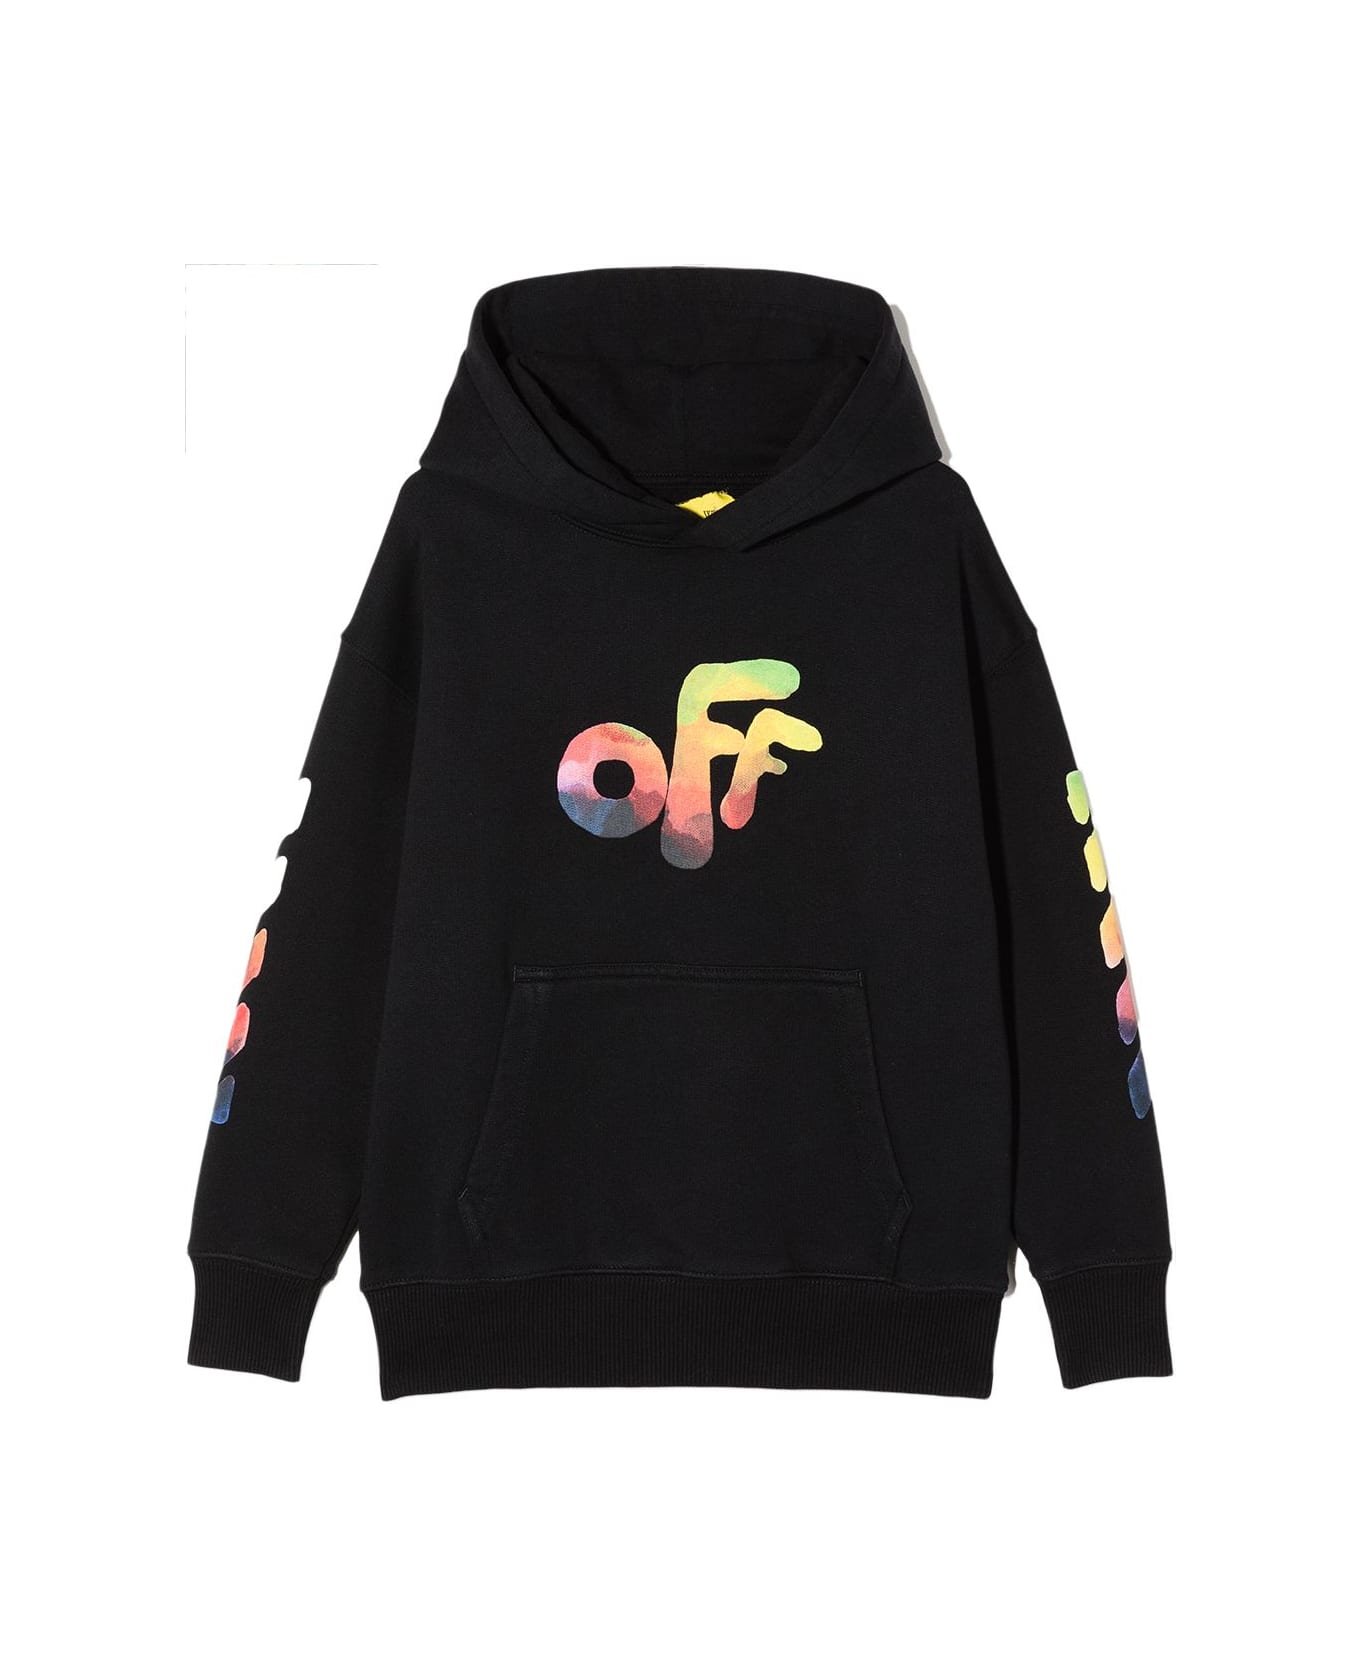 Off-White Off Rounded Watercolor Black Kids Hoodie - Black/multi